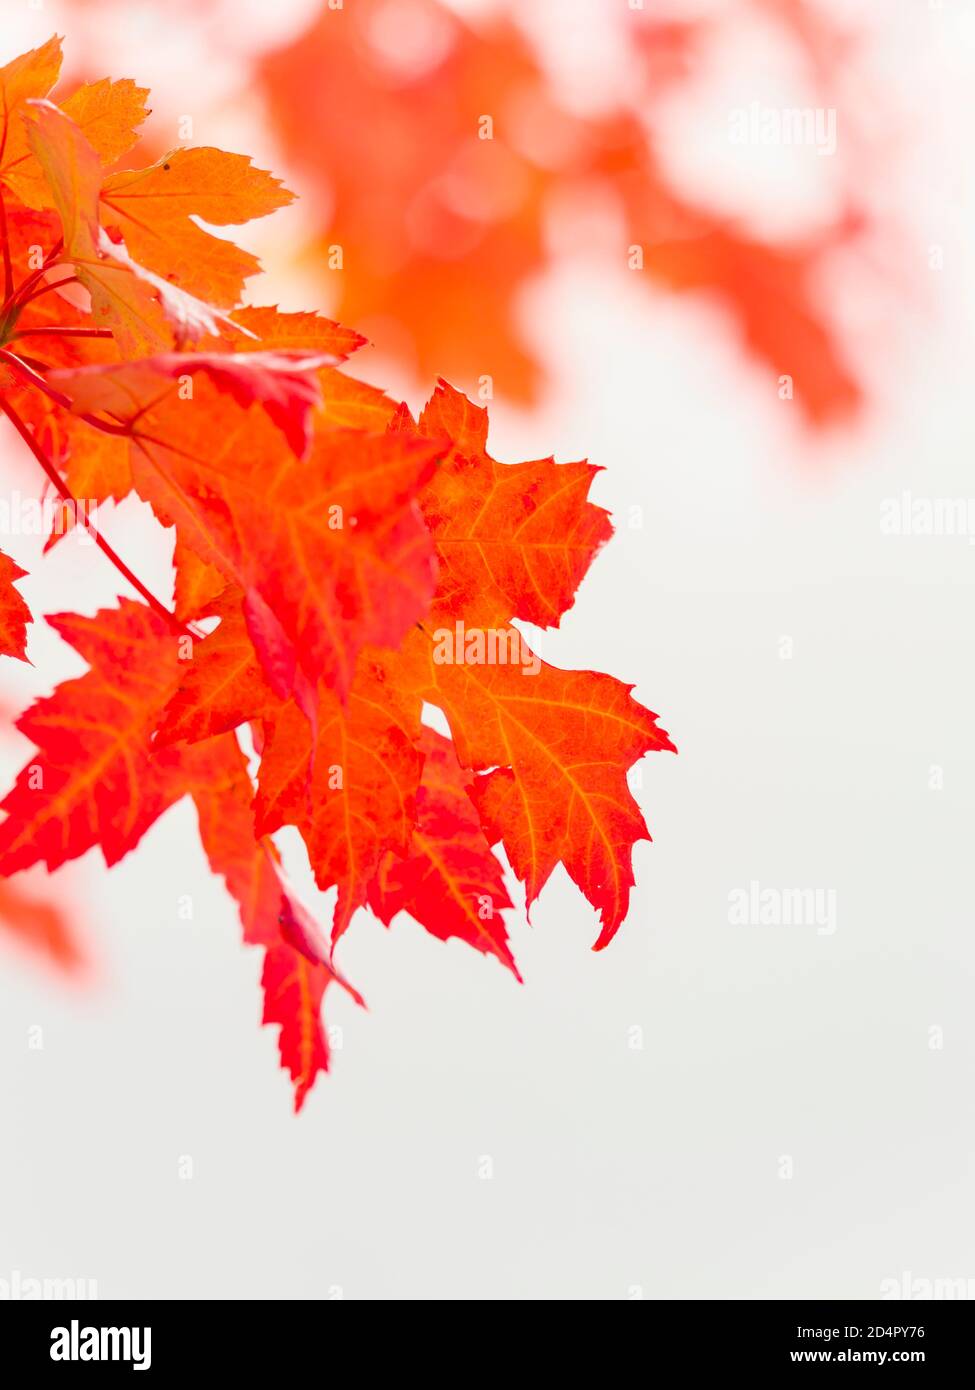 Intensive Red vivid color colored leaves Fall Autumn season seasonal close-up detail isolated closeup almost macro hanging from above Stock Photo